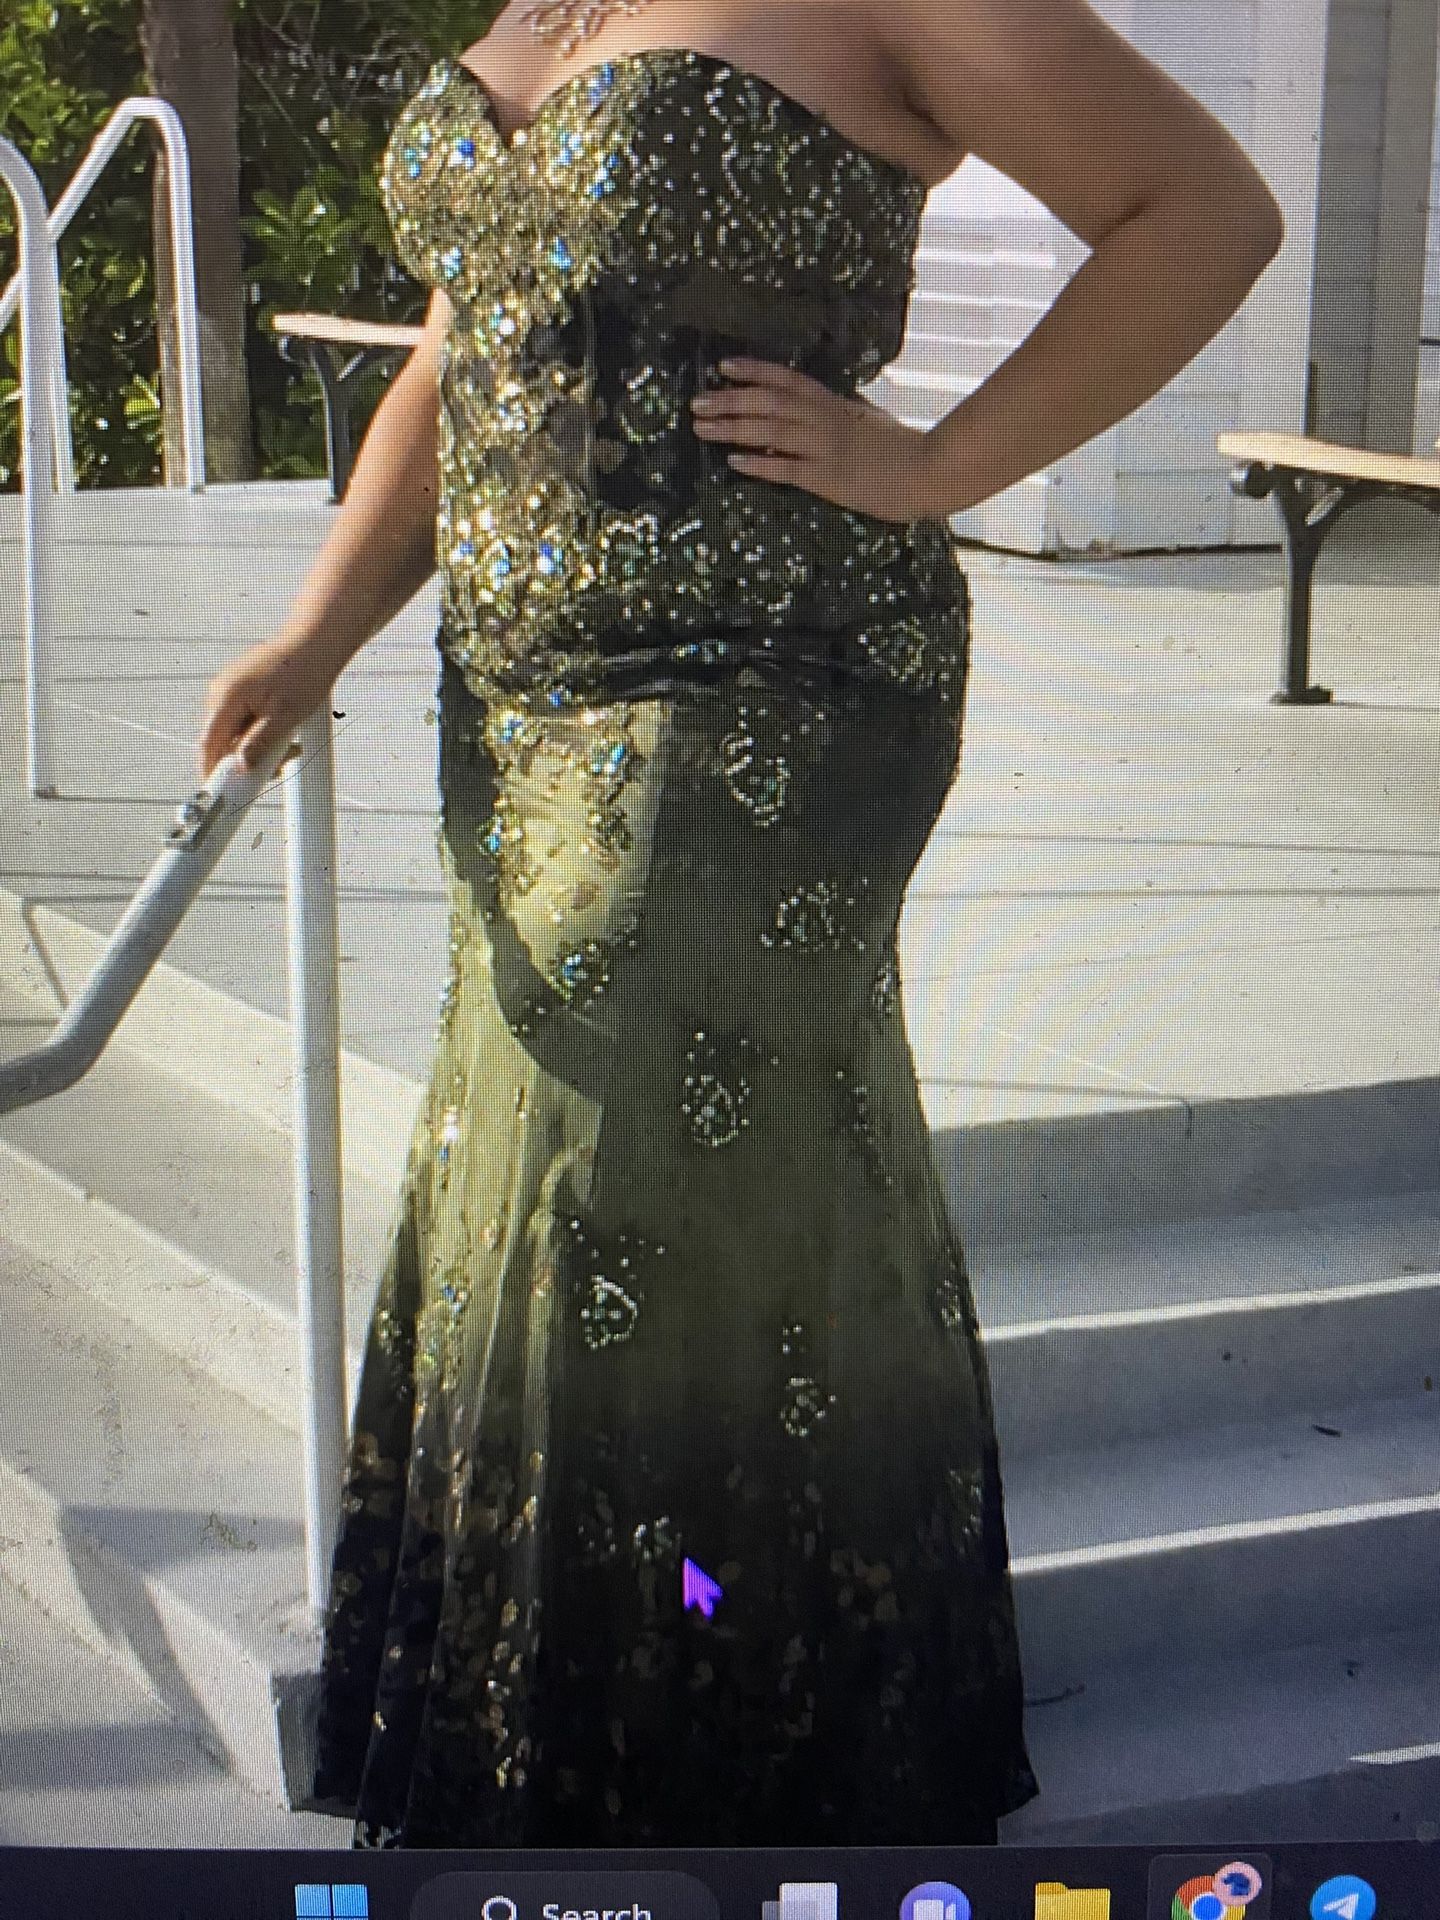 Green Gold Formal Evening Prom Gown “Mermaid Inspired” Size 18